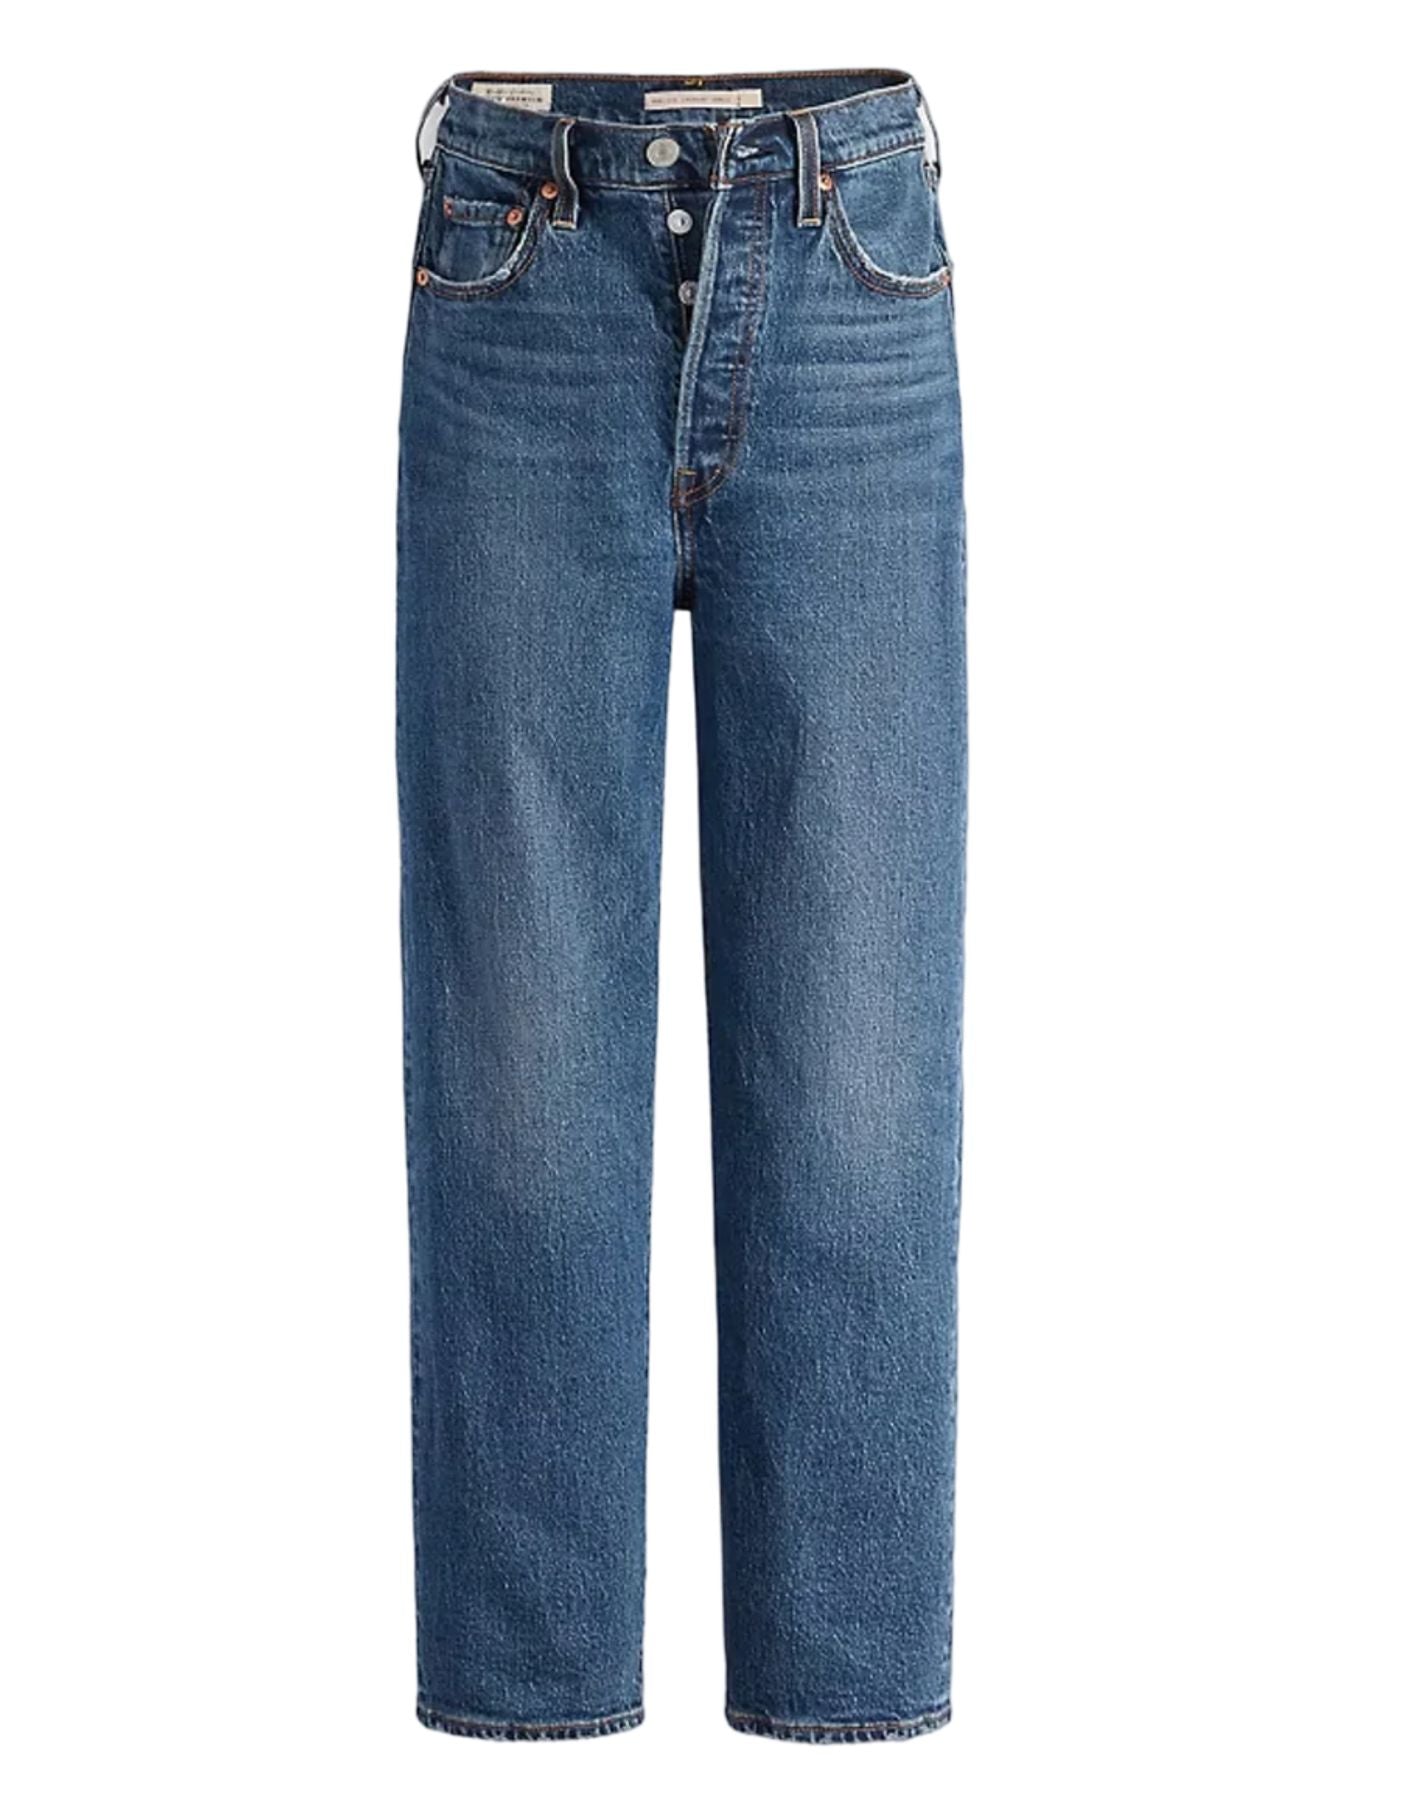 Jeans for woman 726930163 VALLEY VIEW Levi's